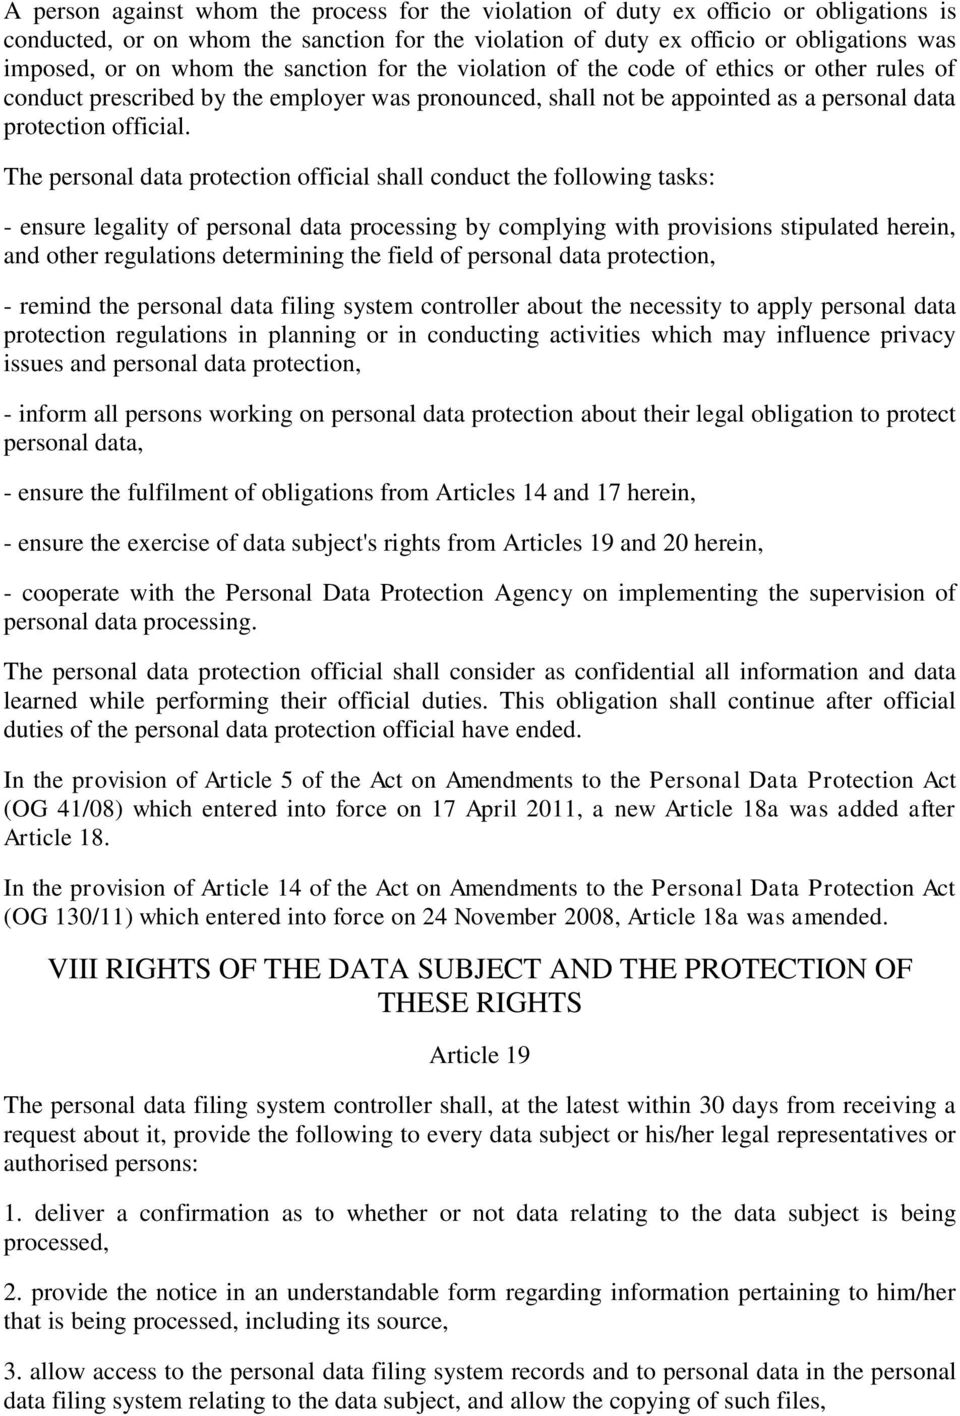 The personal data protection official shall conduct the following tasks: - ensure legality of personal data processing by complying with provisions stipulated herein, and other regulations